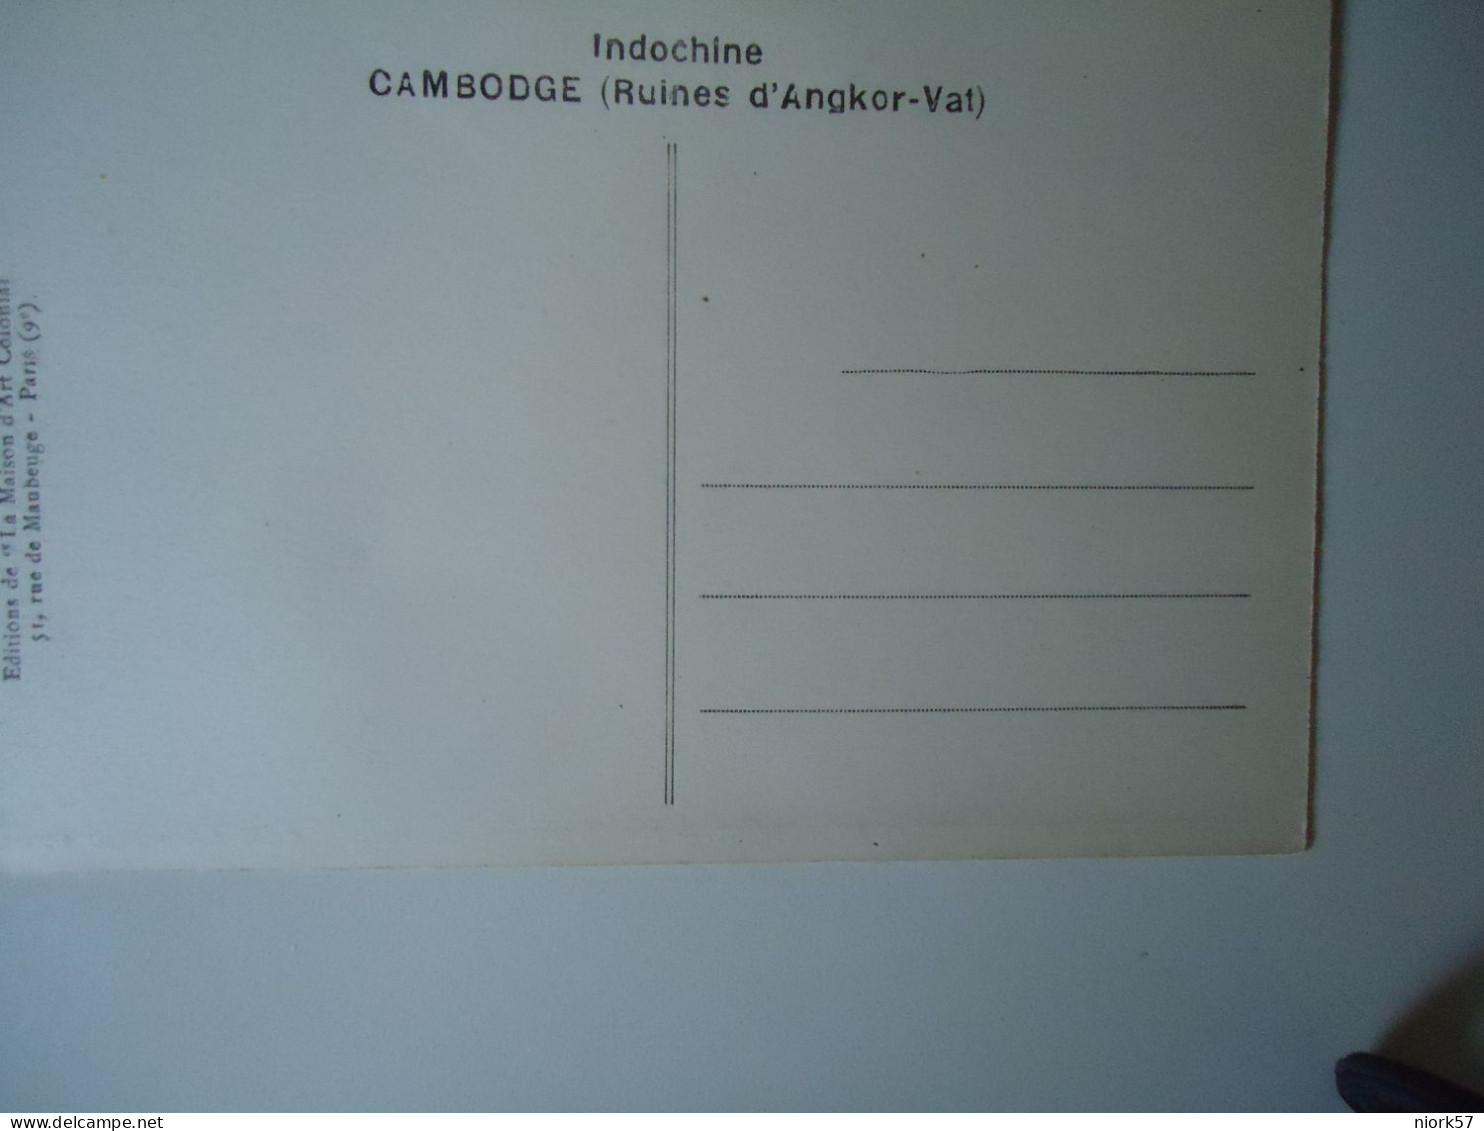 CAMBODIA   POSTCARD  ANGKOR VAT     FOR MORE PURCHASES 10% DISCOUNT - Kambodscha